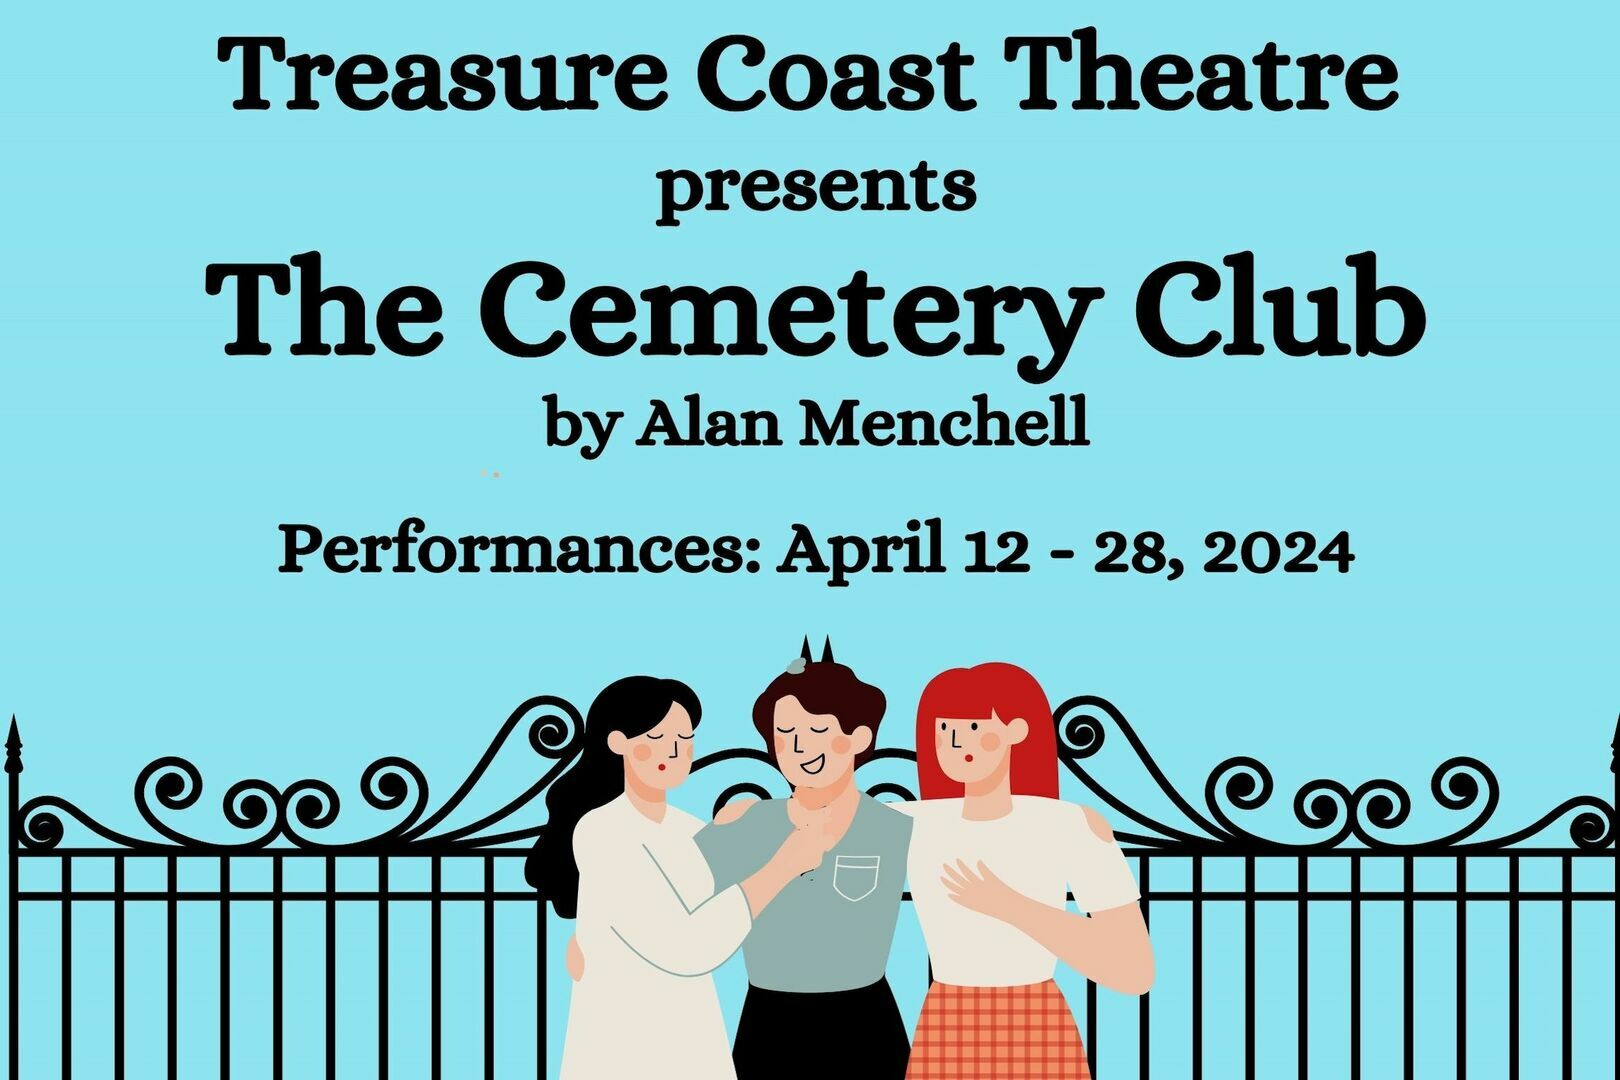 Treasure Coast Theatre presents the touching comedy "The Cemetery Club" by Alan Menchell, Port St. Lucie, Florida, United States